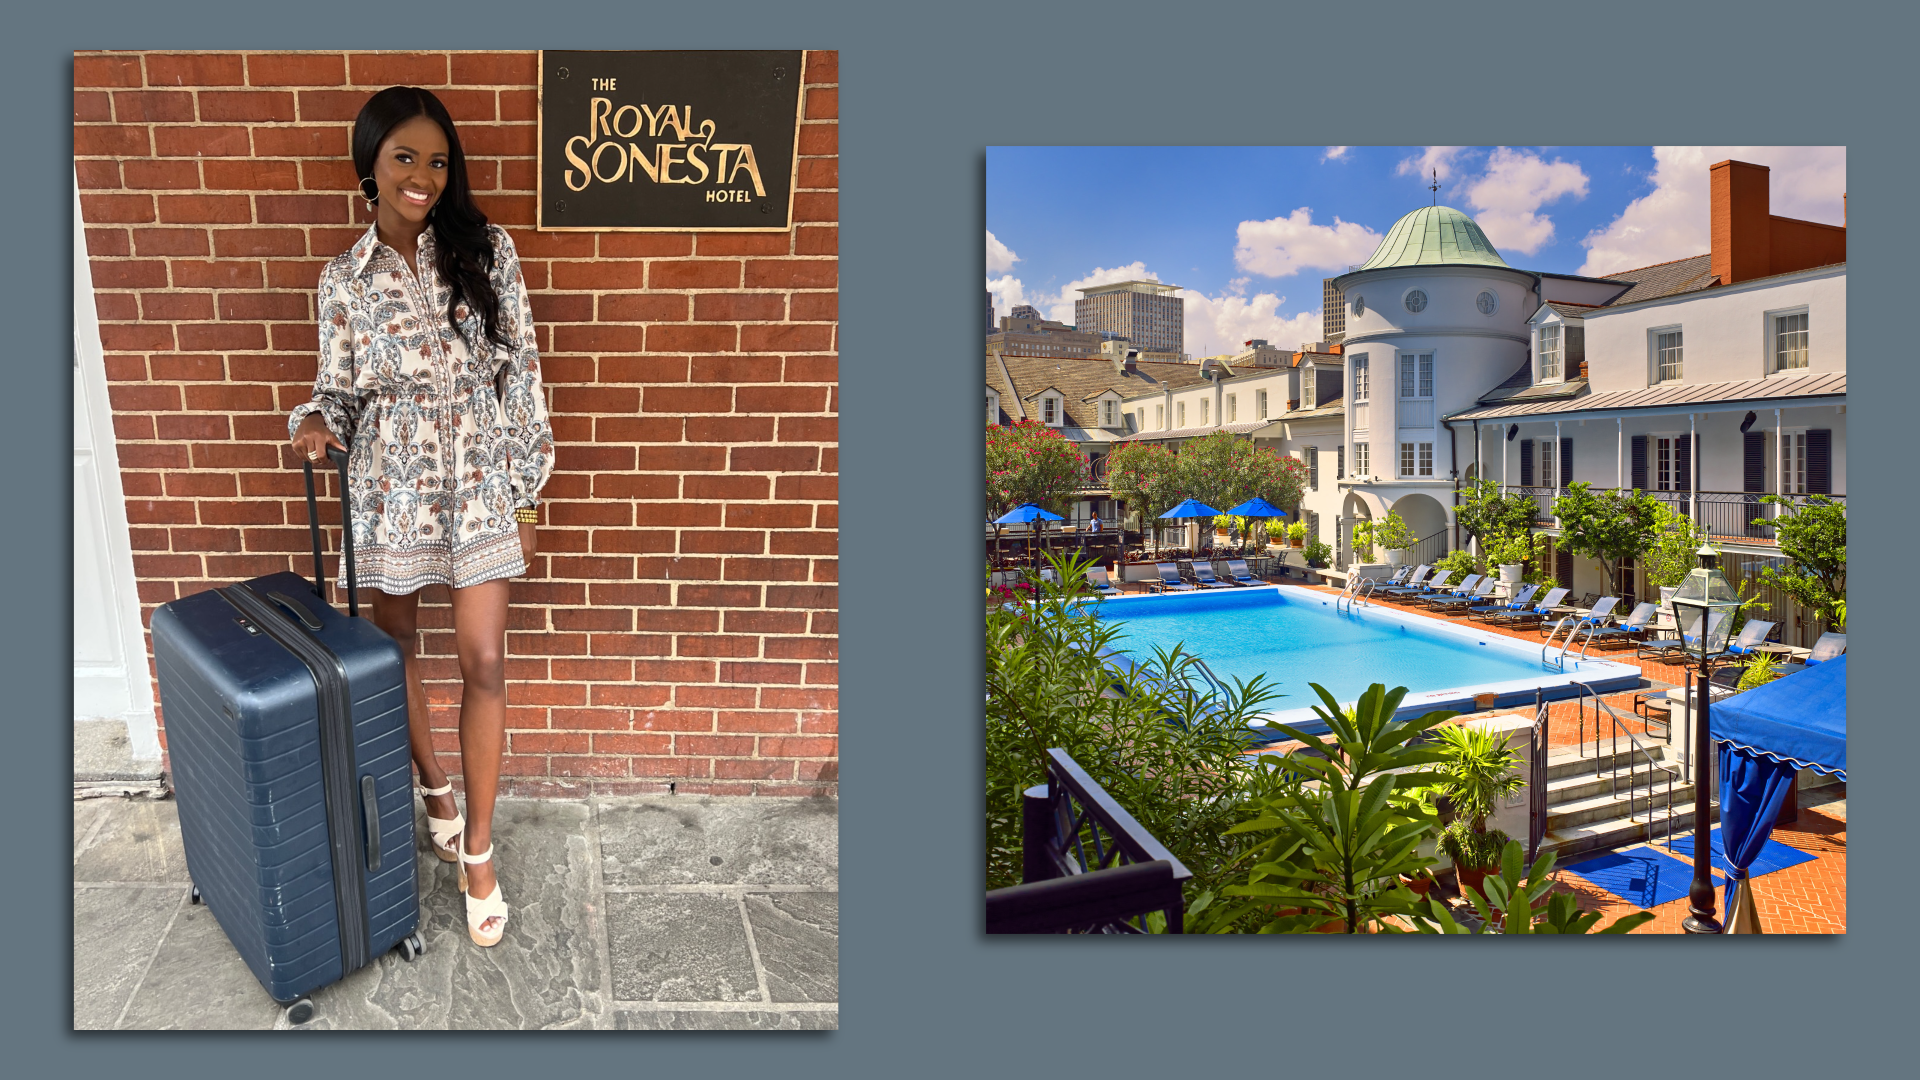 Image shows two photos. Charity Lawson, the new "Bachelorette," is on the left. A photo of the pool at the Royal Sonesta is on the right.